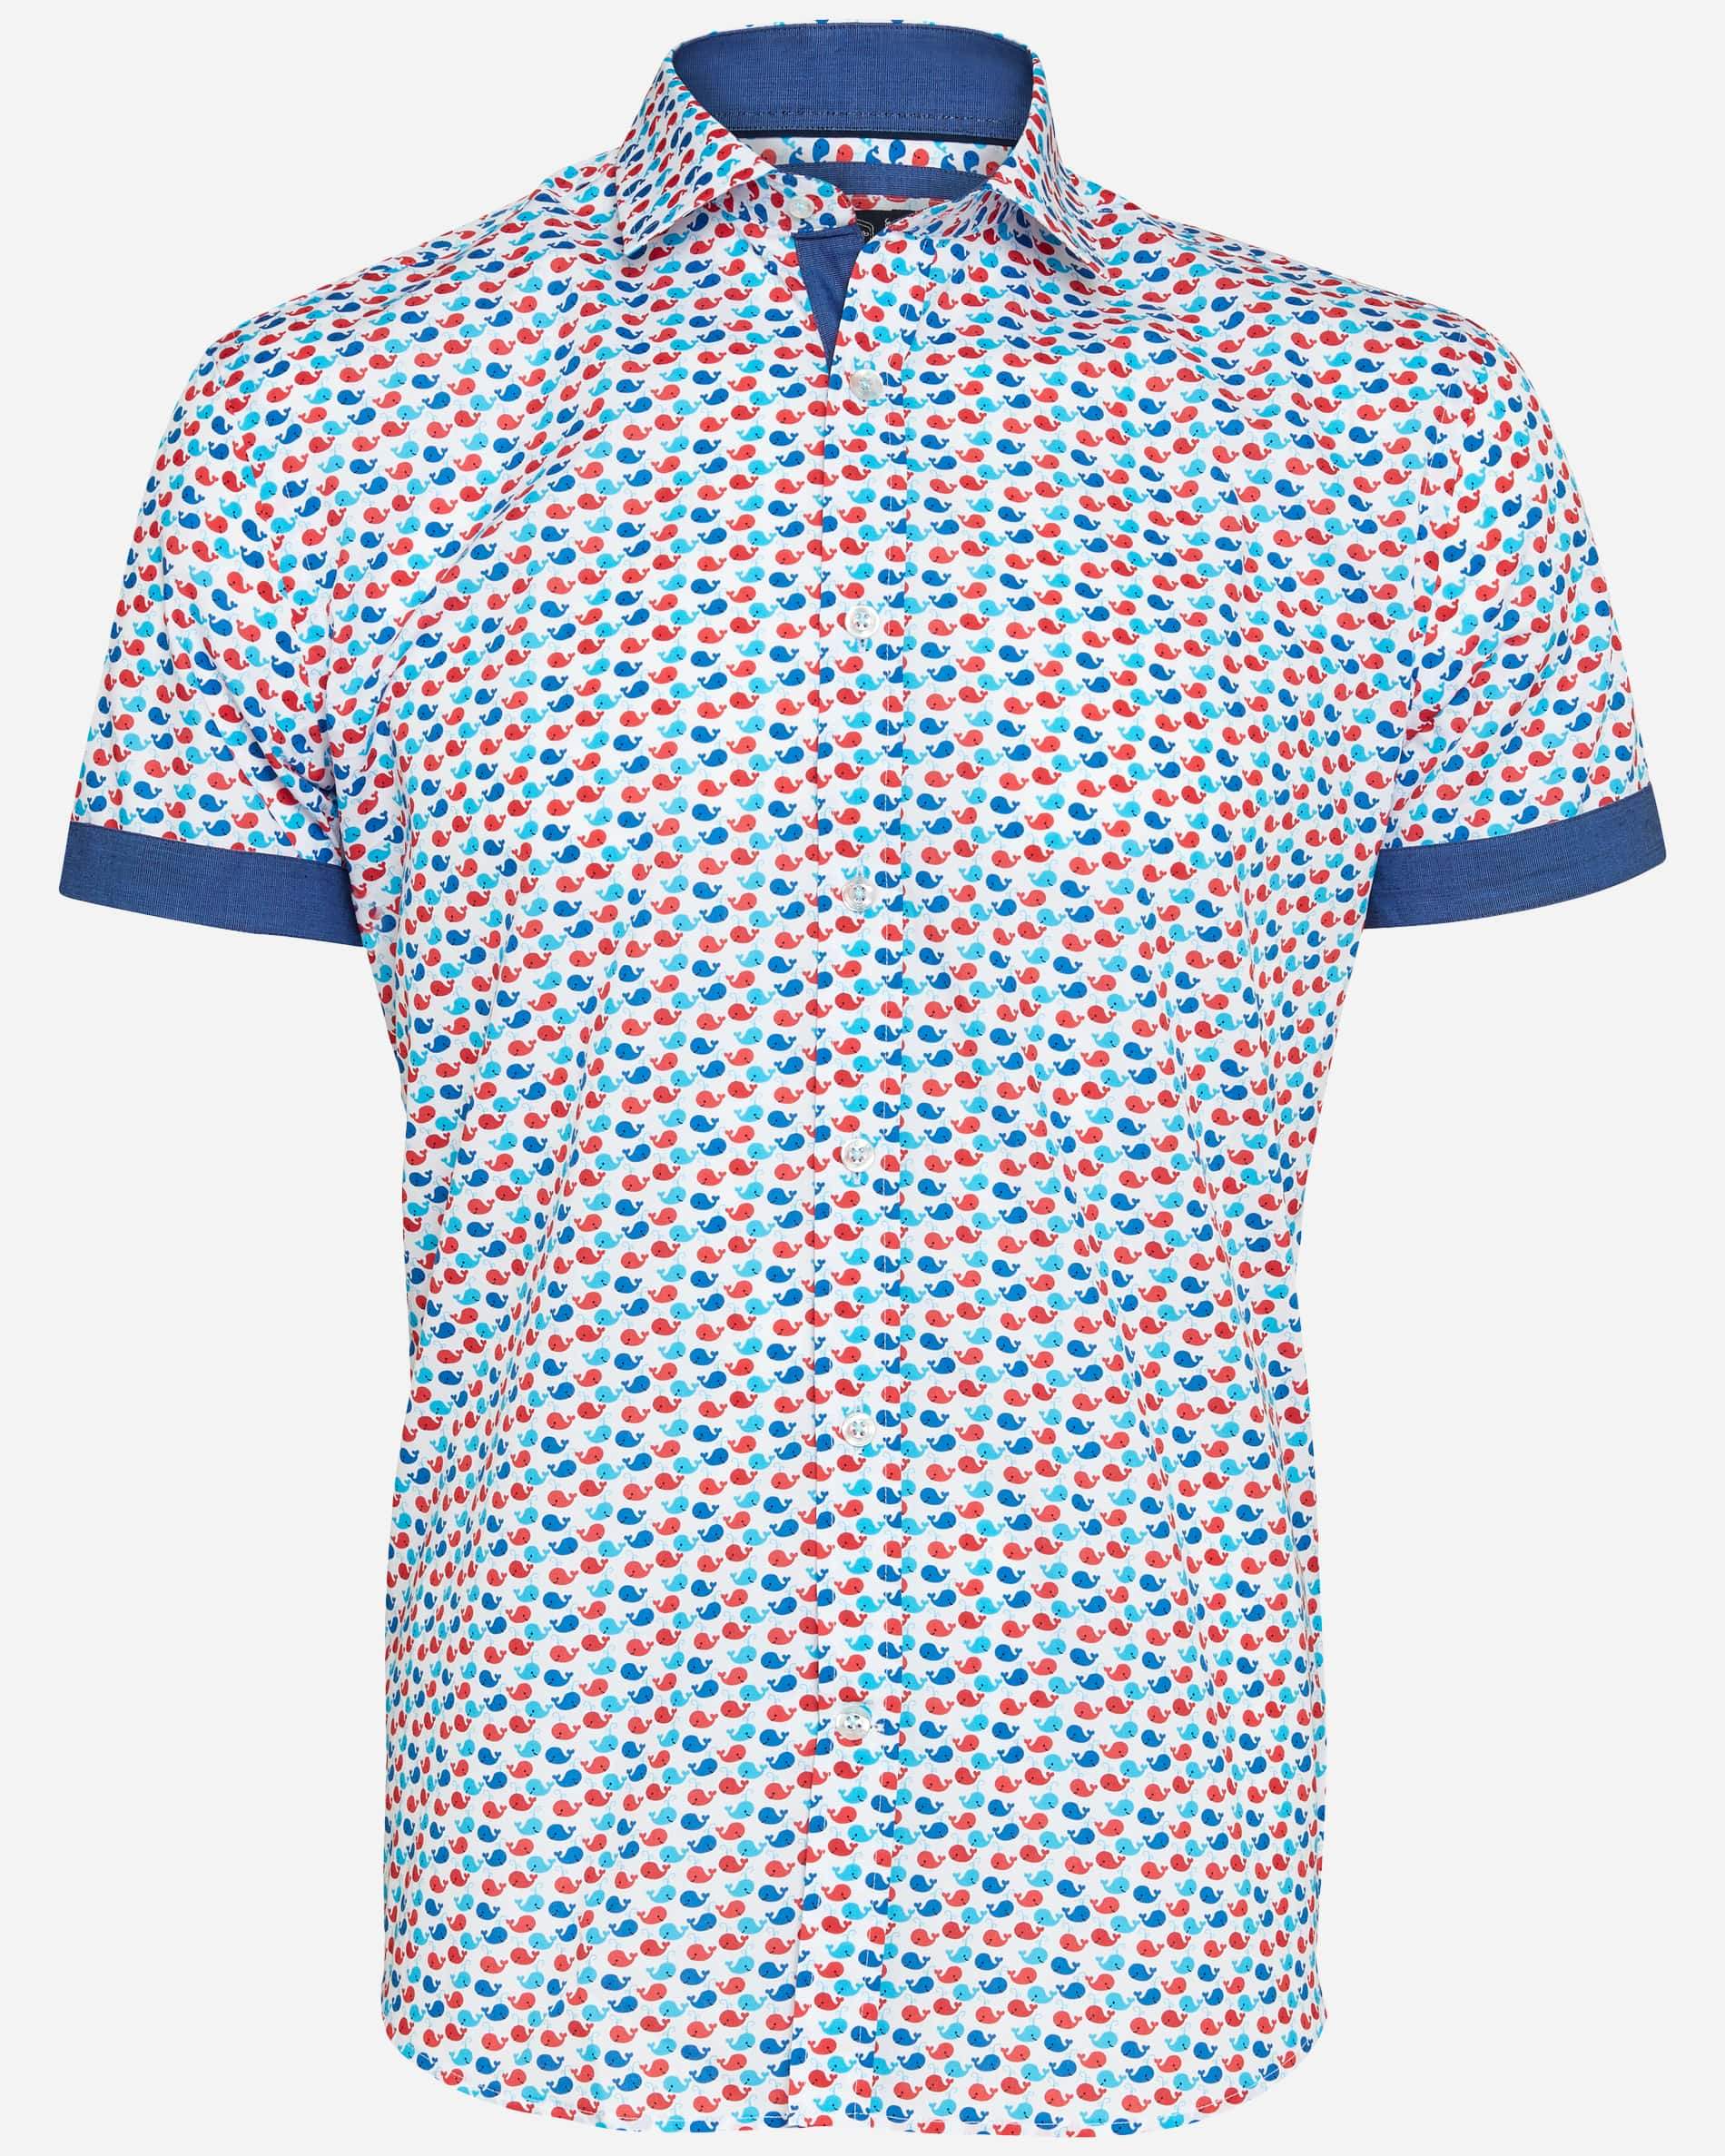 Free Willy S/S Shirt - Men's Short Sleeve Shirts at Menzclub